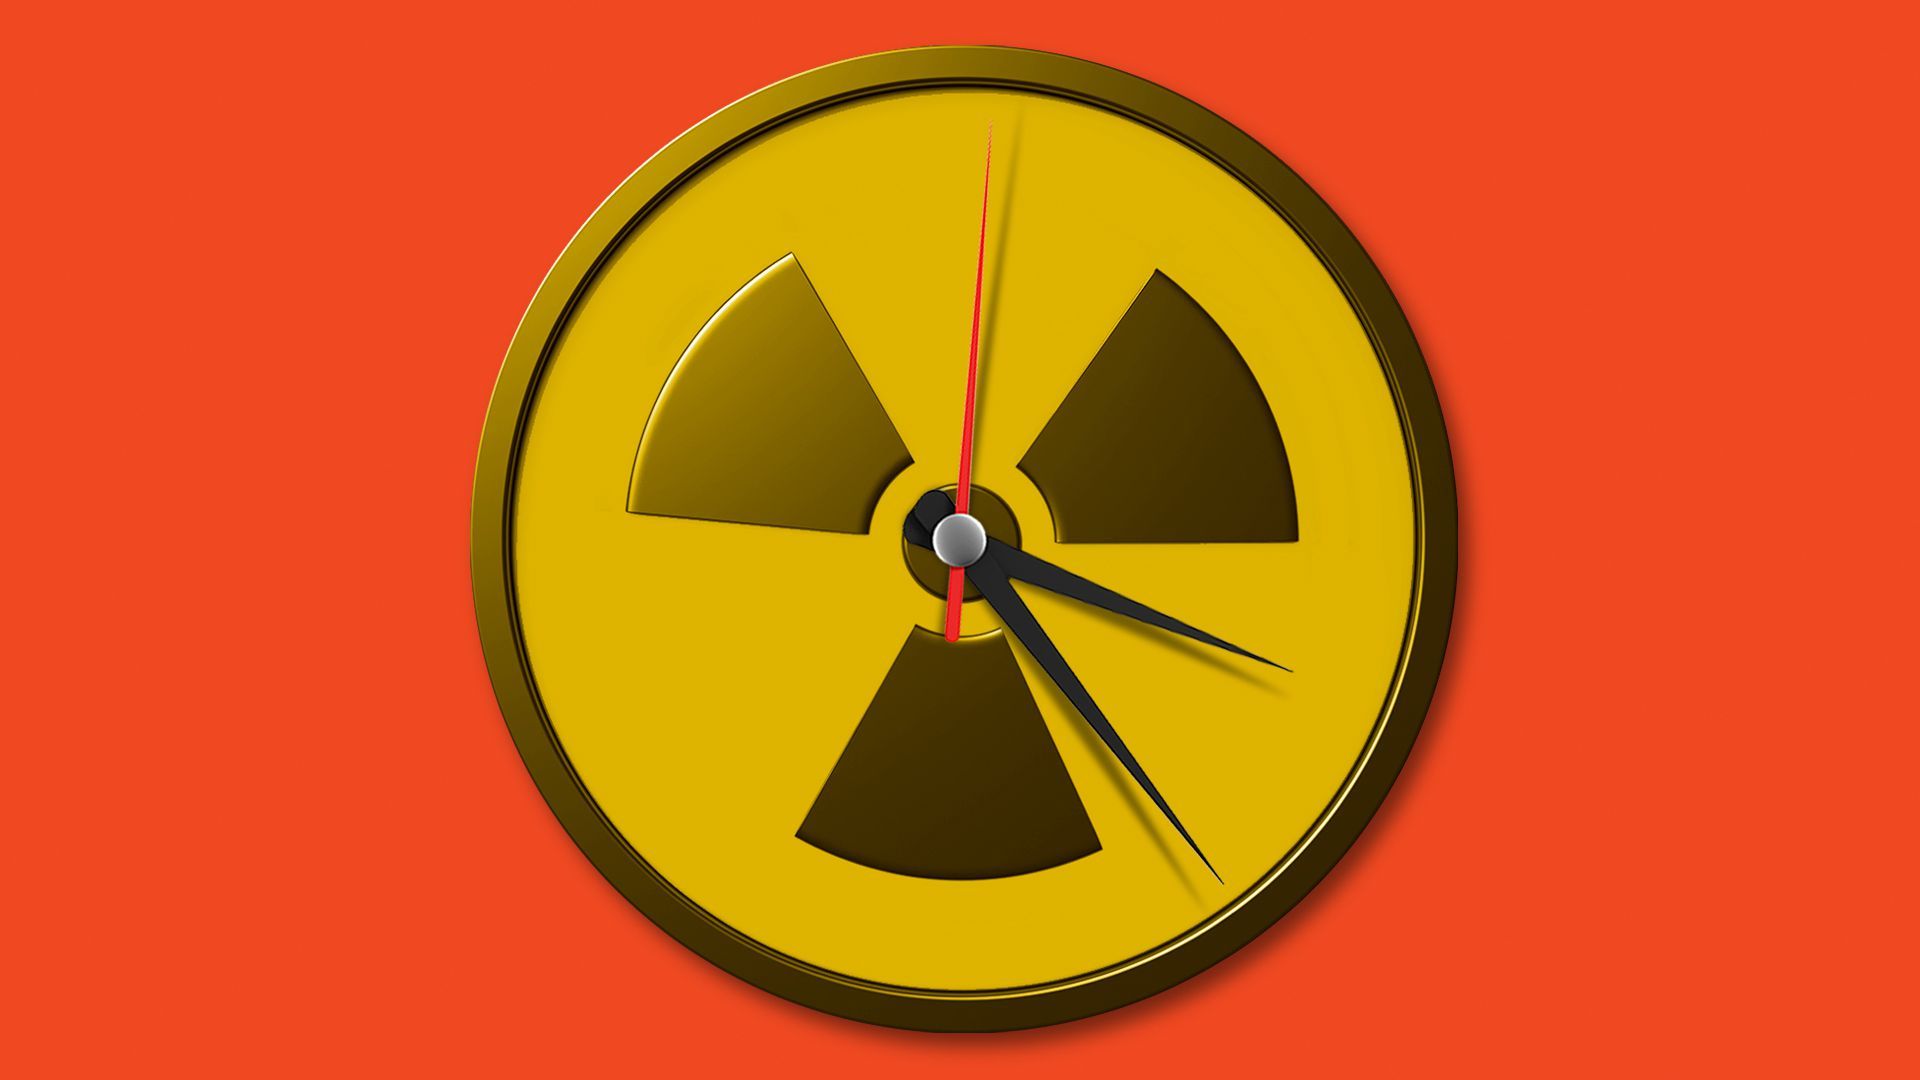 Illustration of a nuclear warning as a clock face